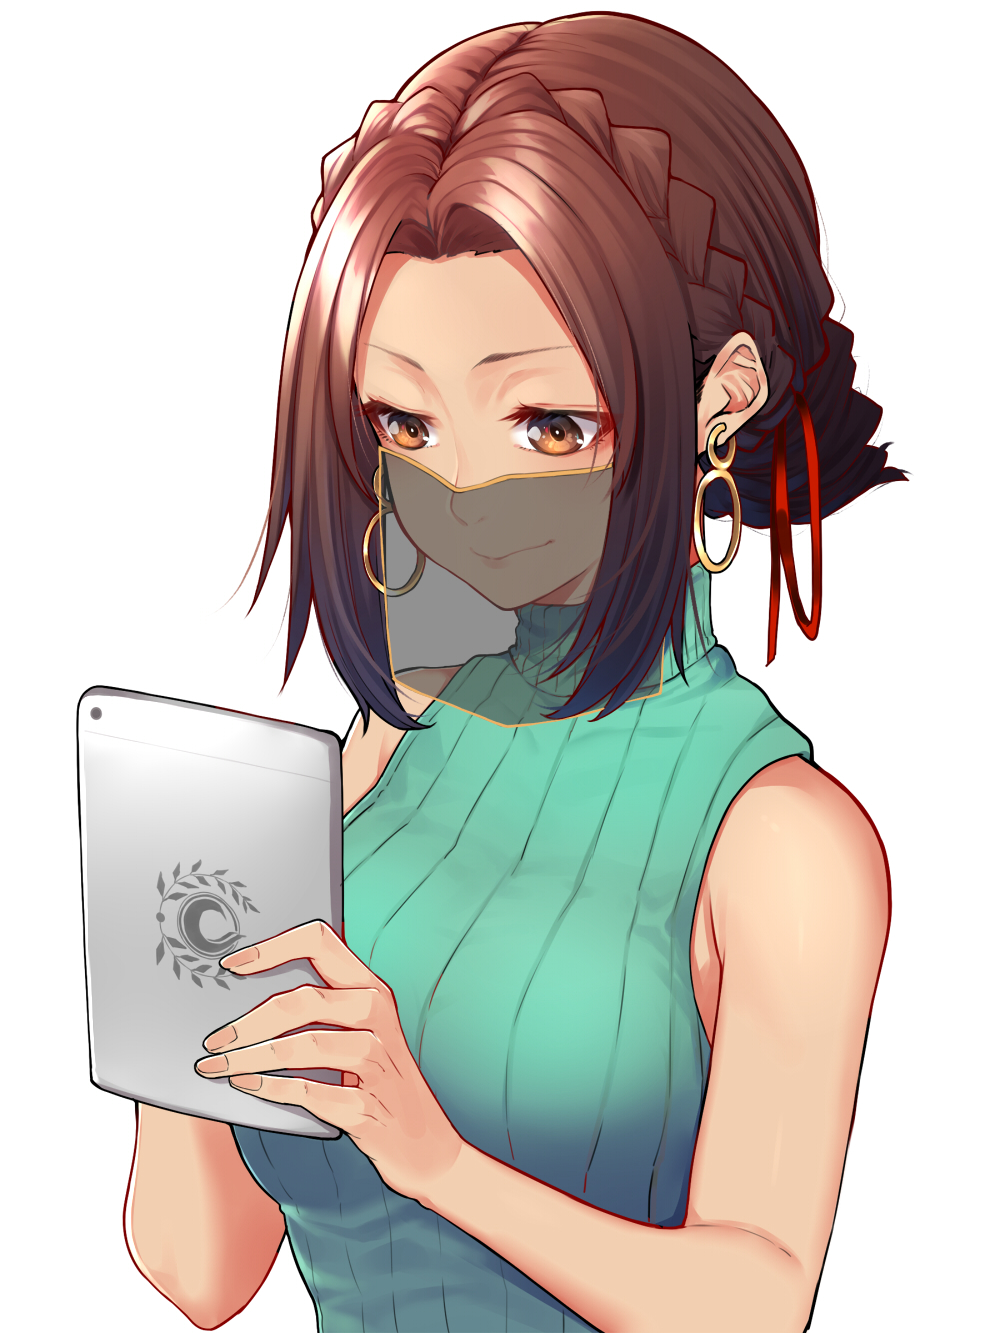 Fate Grand Order Fate Series Tablet Veils Brunette French Braid Hairbun Brown Eyes Anime Girls Red R 1000x1333